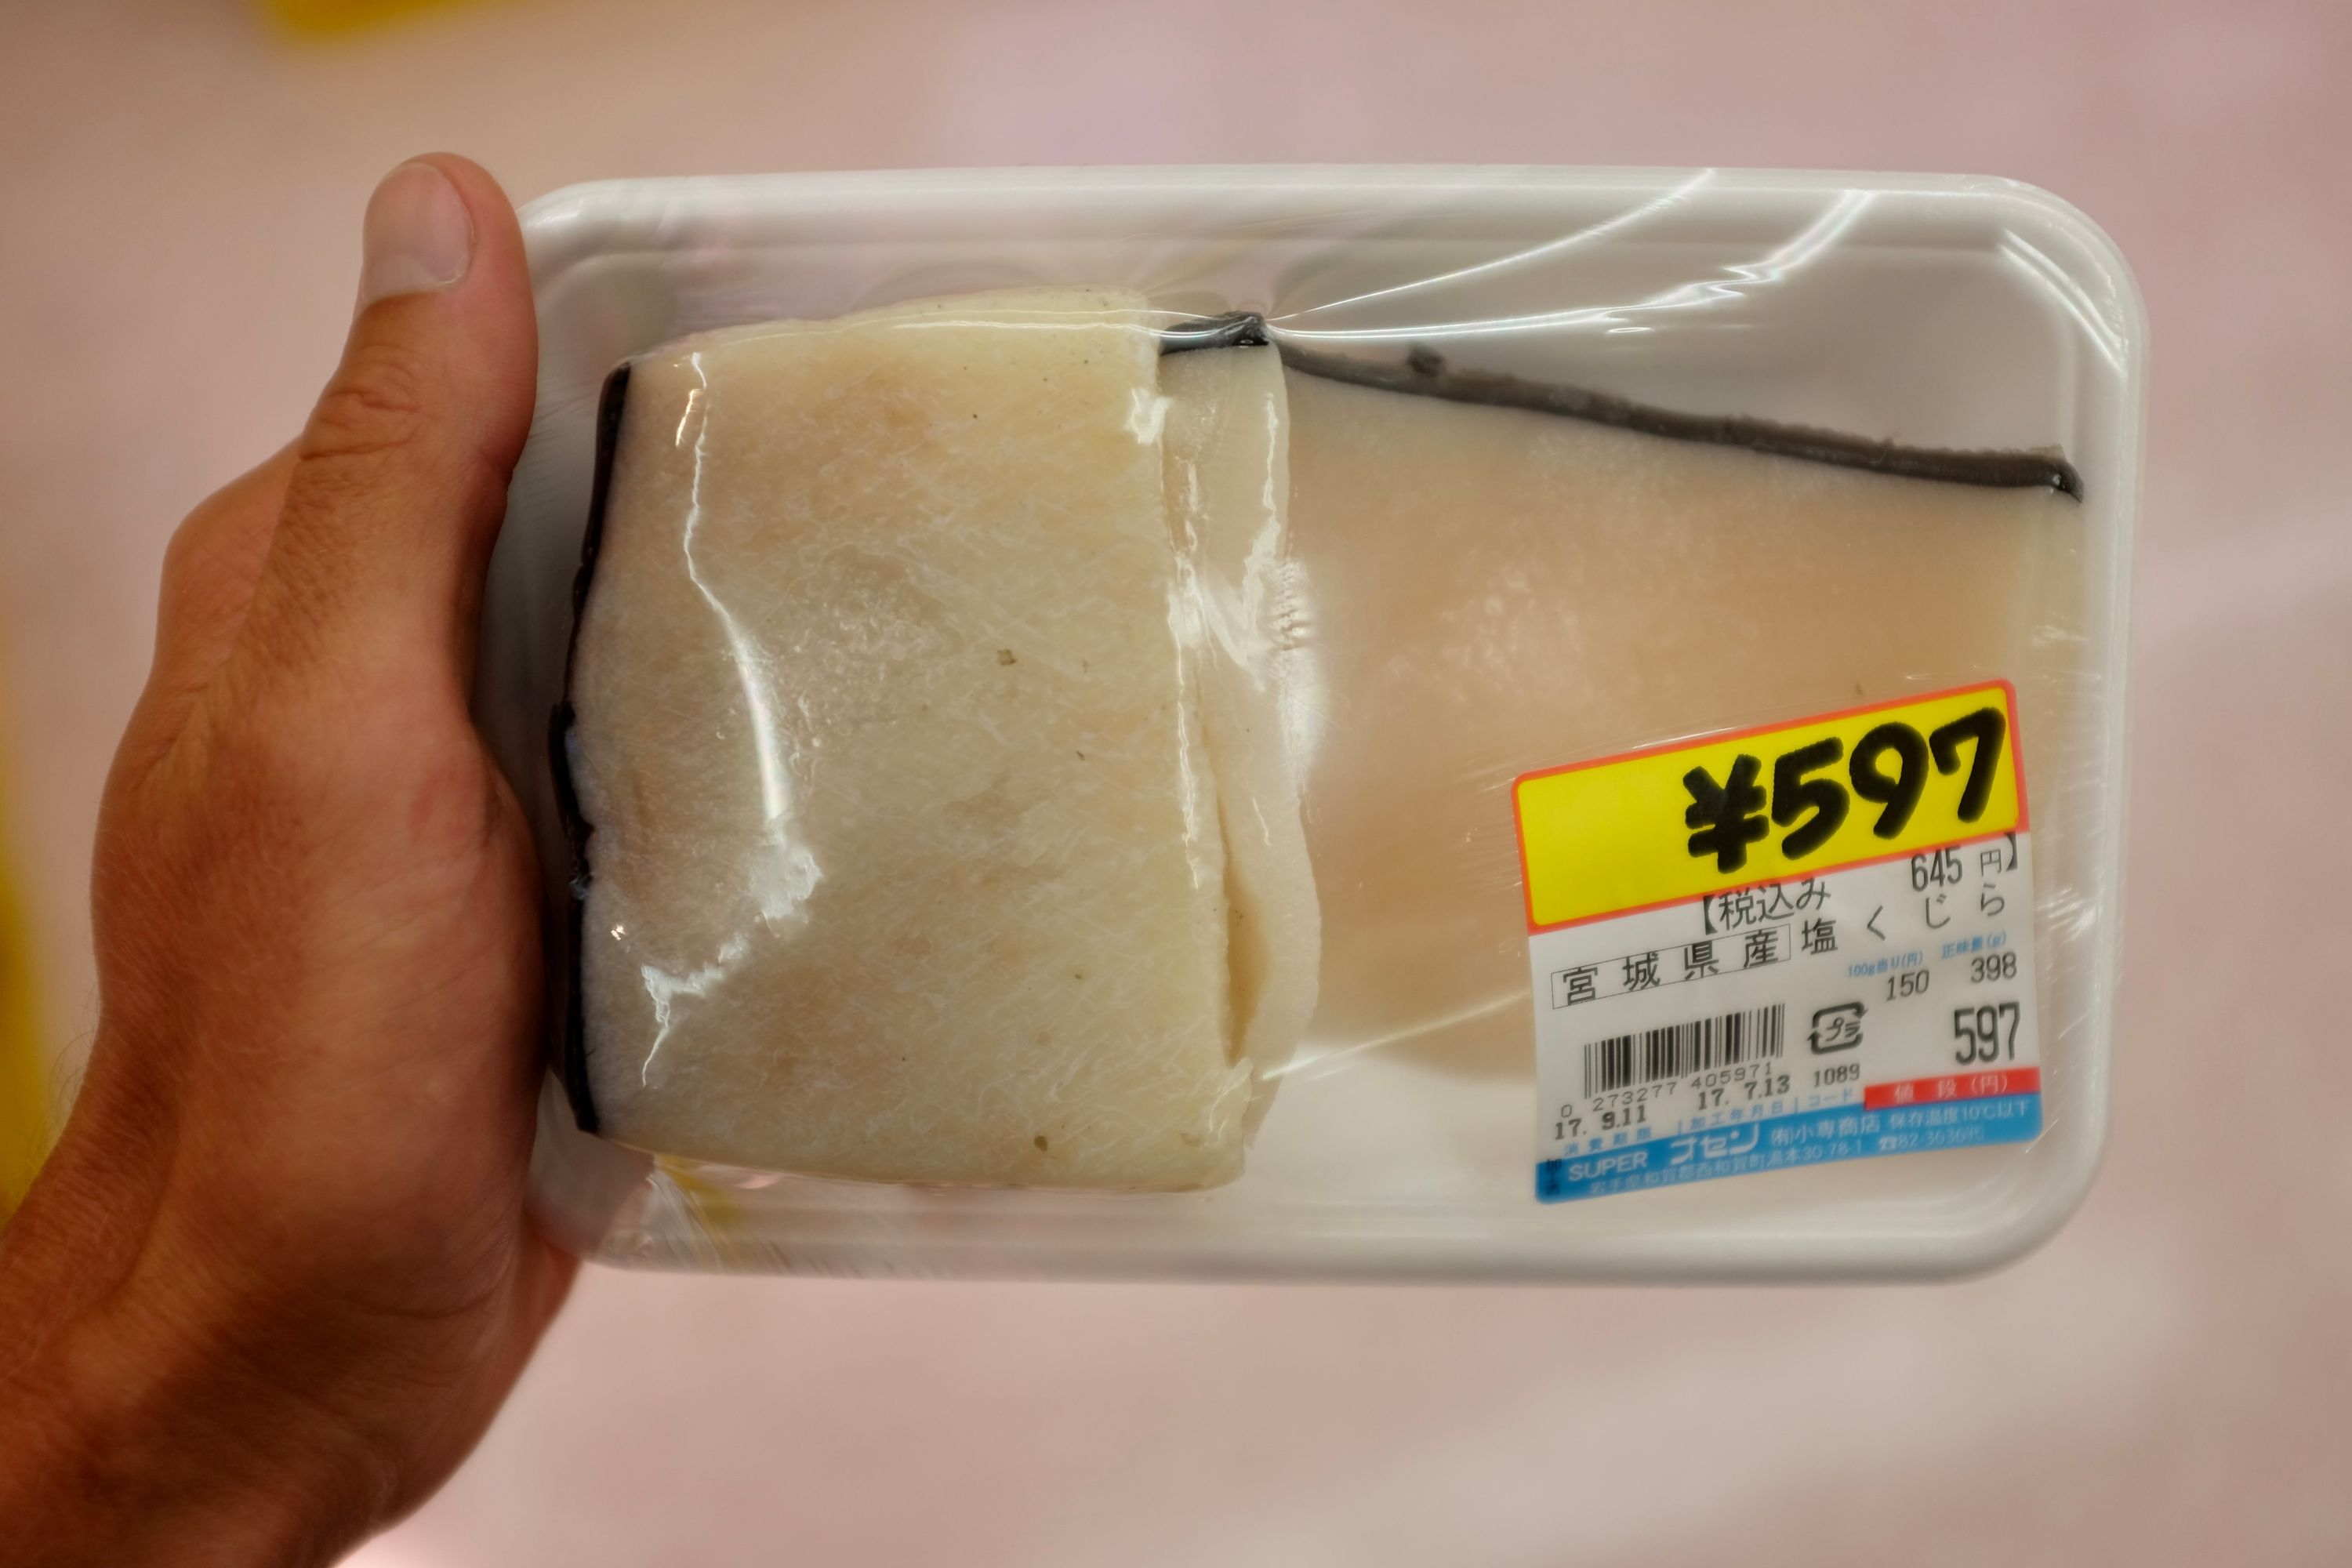 The author holds a piece of packaged whale meat costing ¥597 in his left hand.